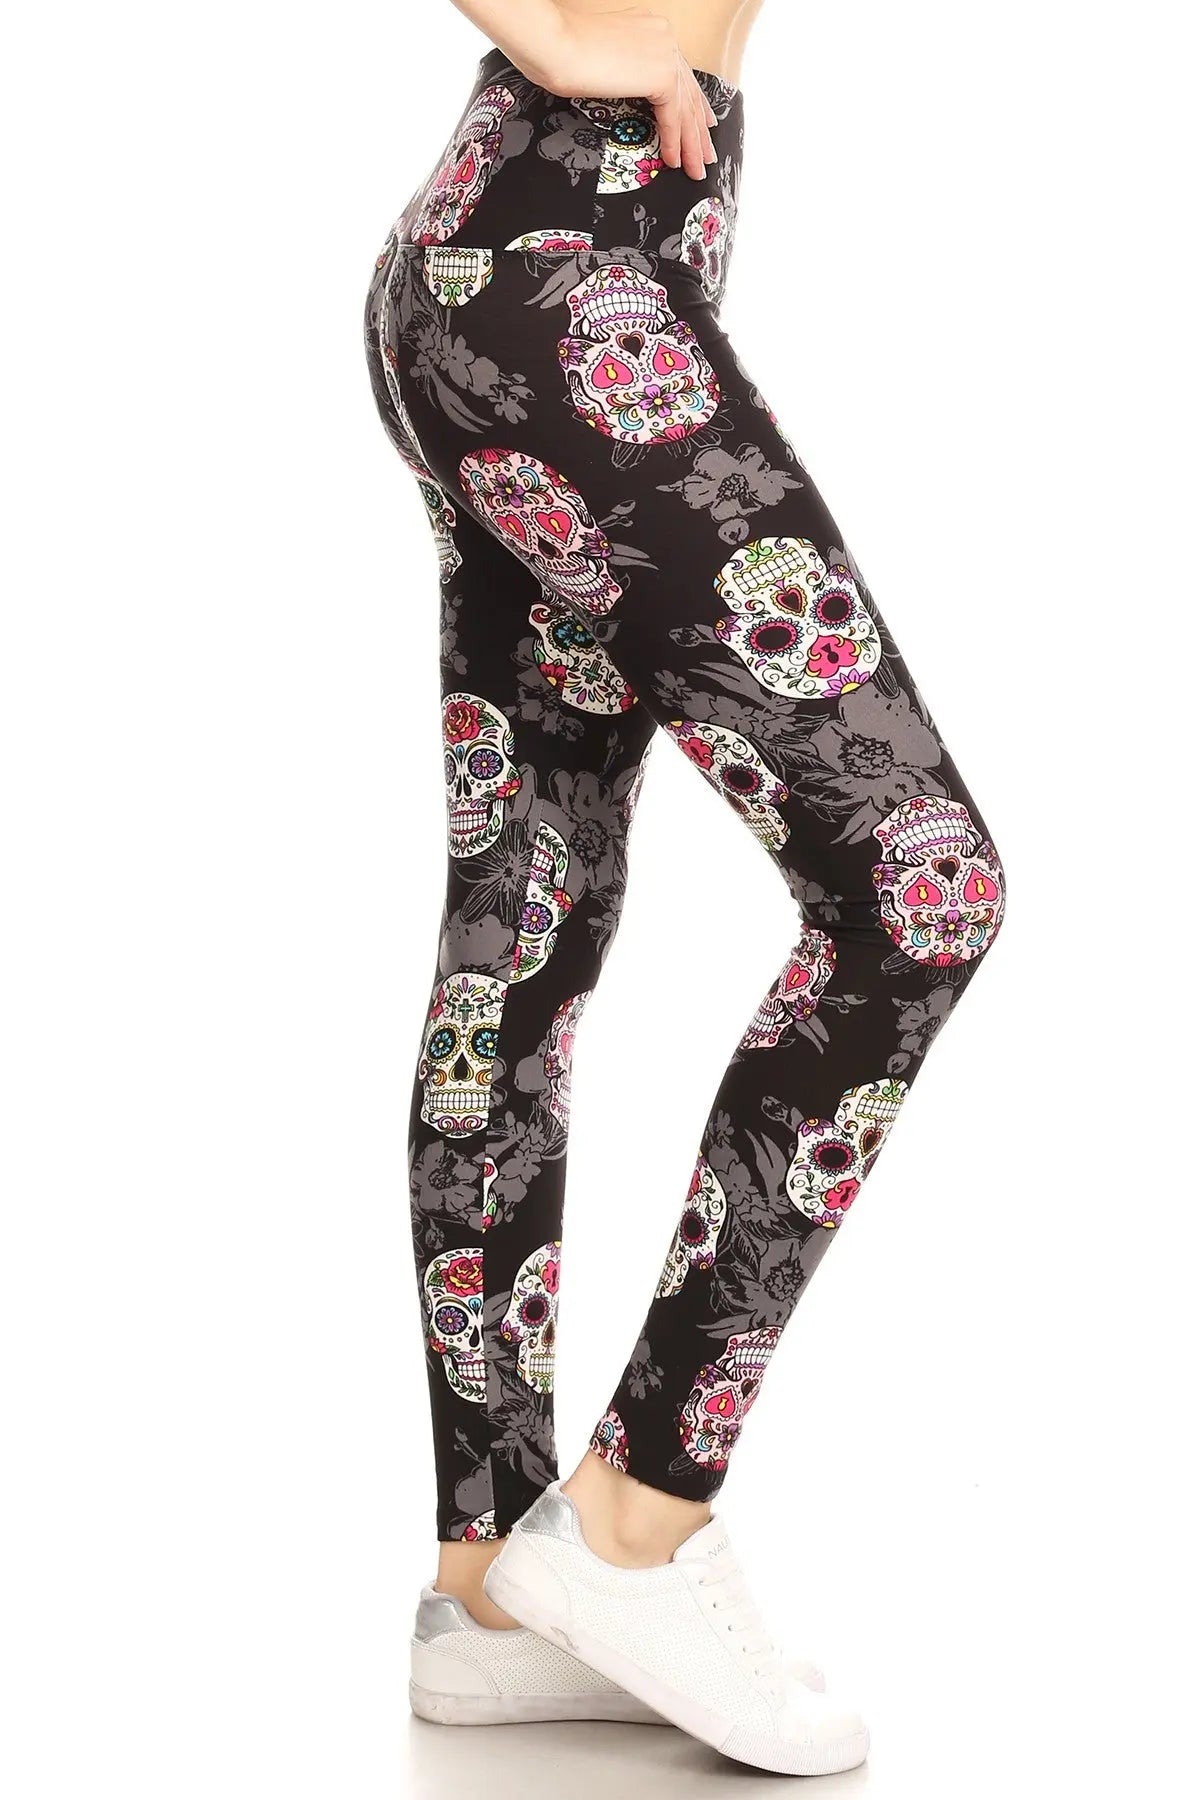 5-inch Long Yoga Style Banded Lined Skull Printed Knit Legging With High Waist Sunny EvE Fashion